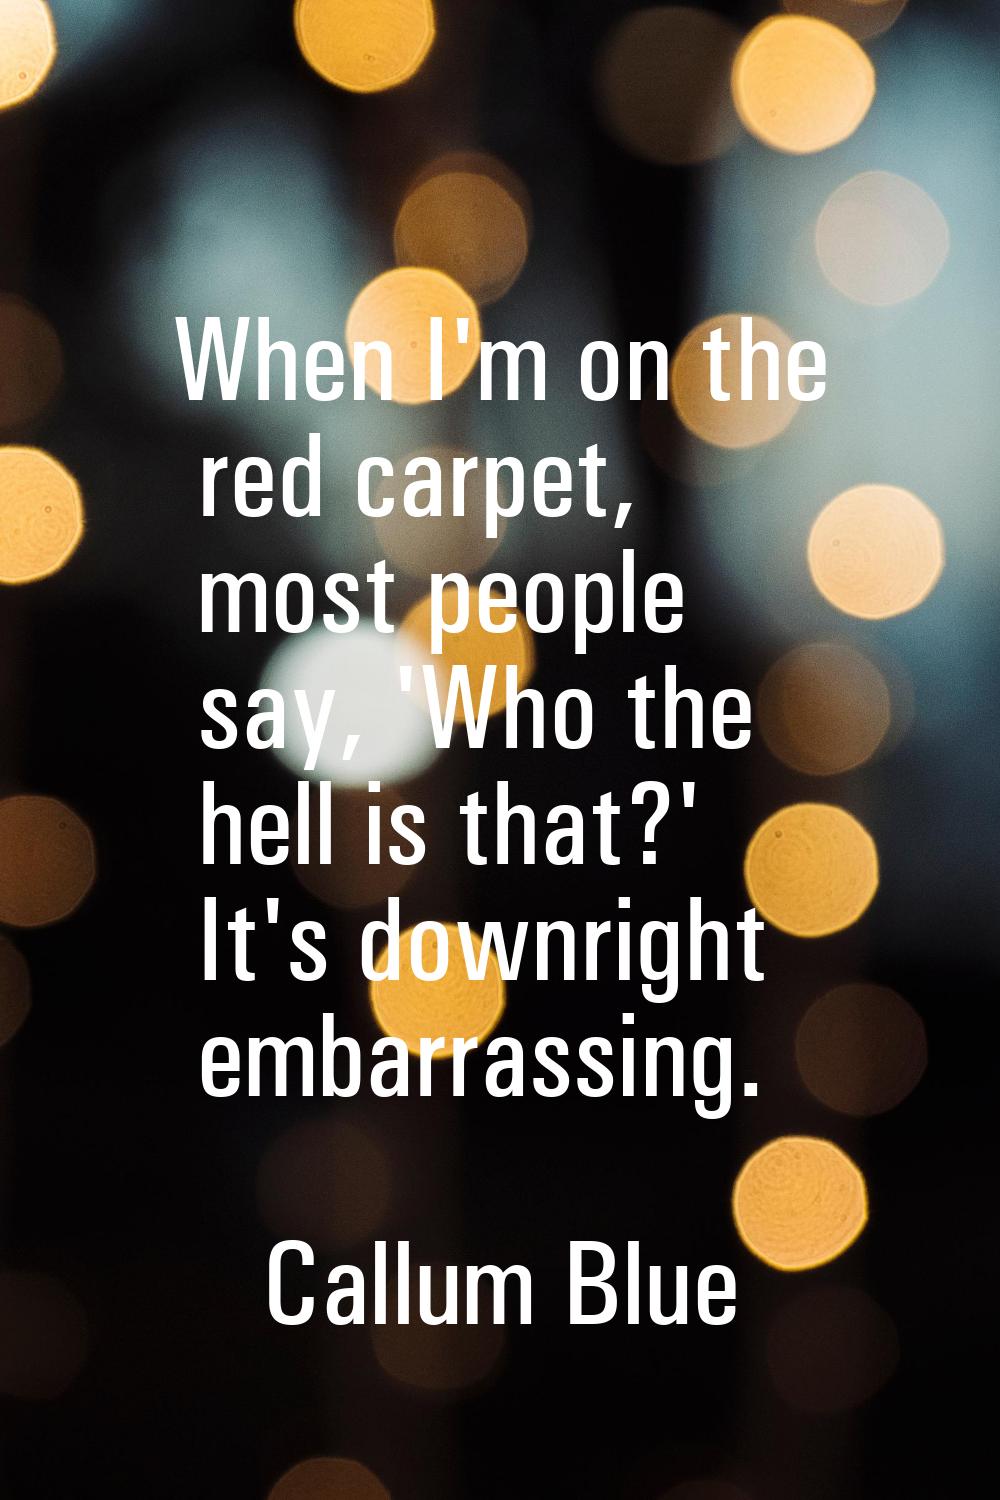 When I'm on the red carpet, most people say, 'Who the hell is that?' It's downright embarrassing.